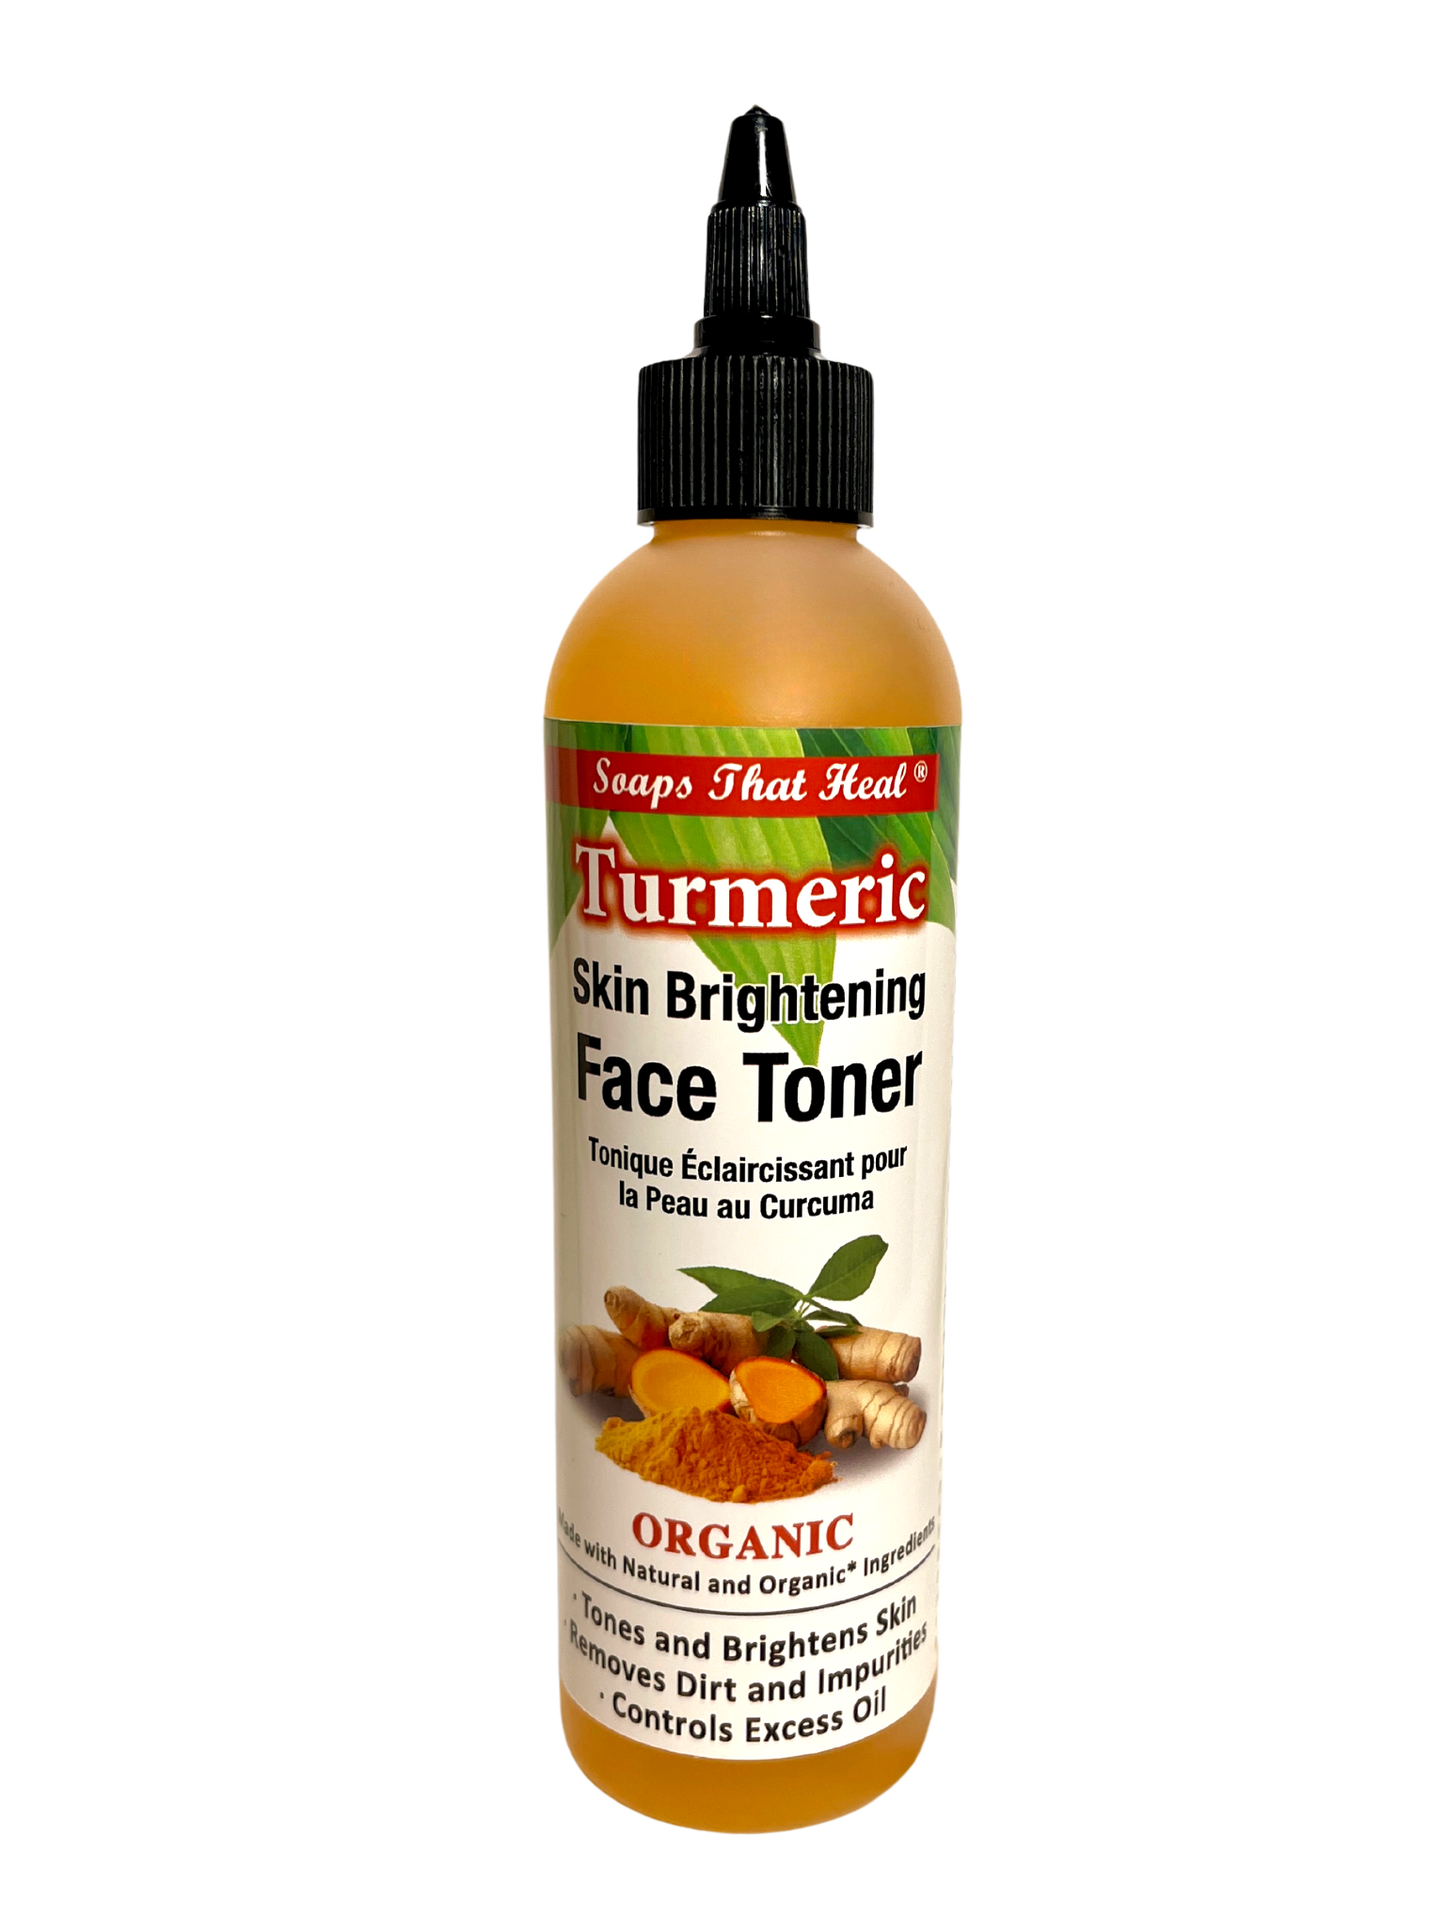 turmeric skin brightening face toner, soaps that heal turmeric soap, natural lightening, natural alternatives to whitening creams,fade creams,bleaching creams,Remove Dark Spots and Acne,aspen kay,Healthy Skin, Natural Products Skin Care, problem skin,Turmeric Soap,the best body soap,saje,soaps that heal,healing soap, how to get rid of dark marks,dark spots,whitening soaps,lightening soaps,hyperpigmentation, best turmeric soap,oilblends,uncle benney's,soaps that heal